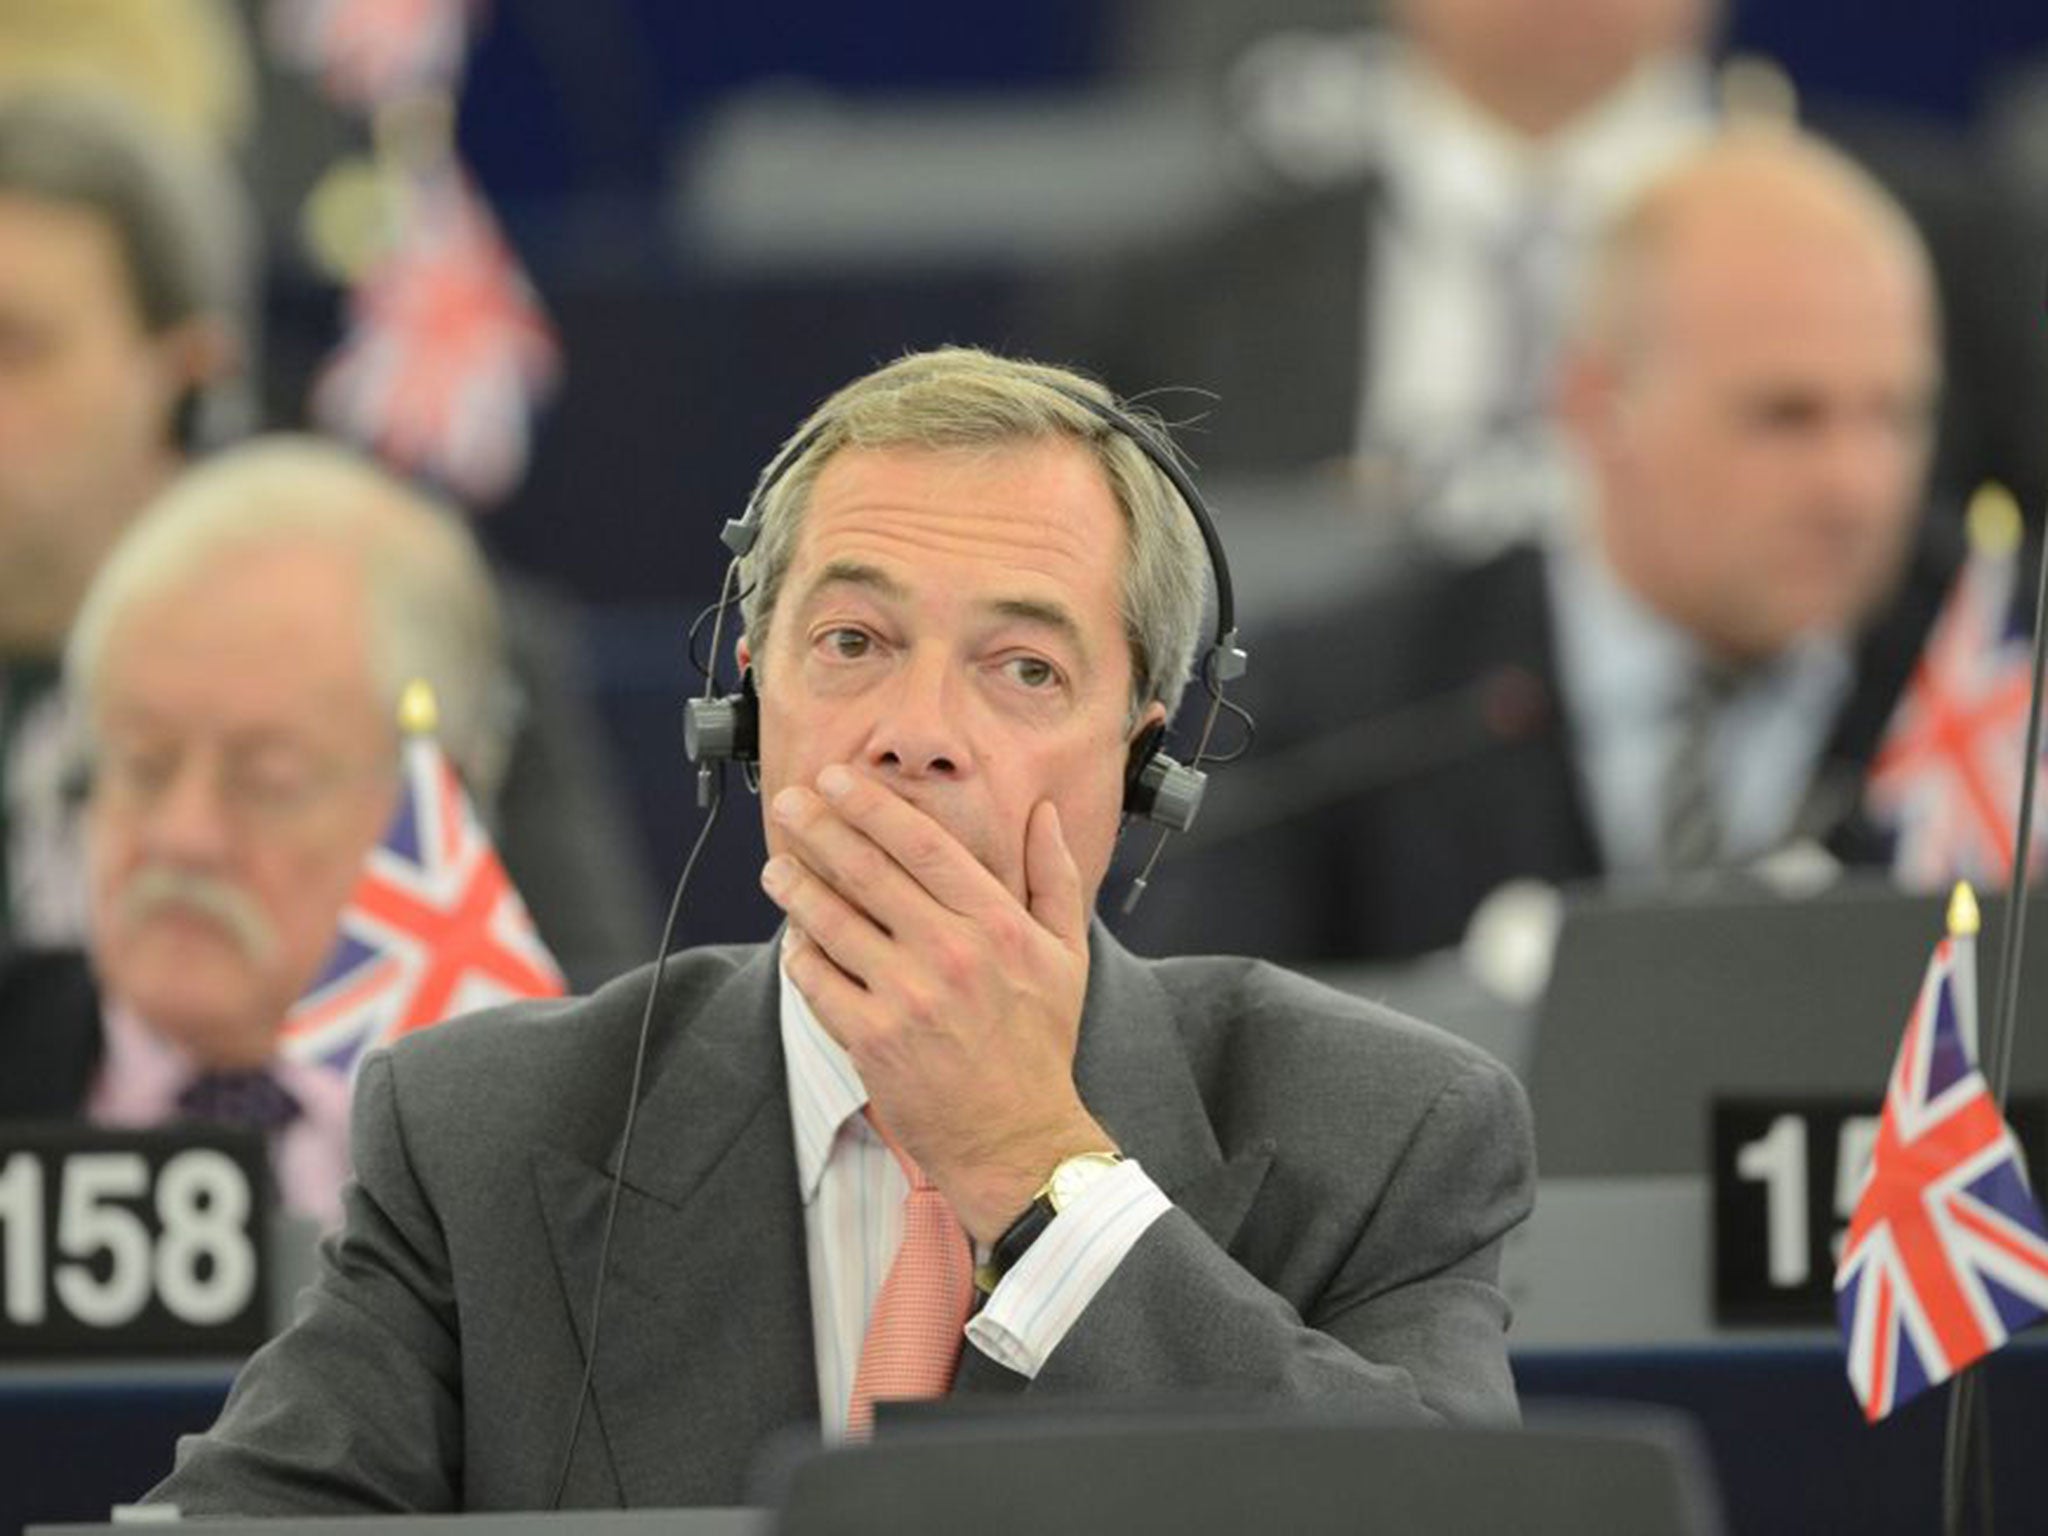 The arrogance of Brussels bureaucrats is as irritating to Europhiles as to sceptics like Nigel Farage